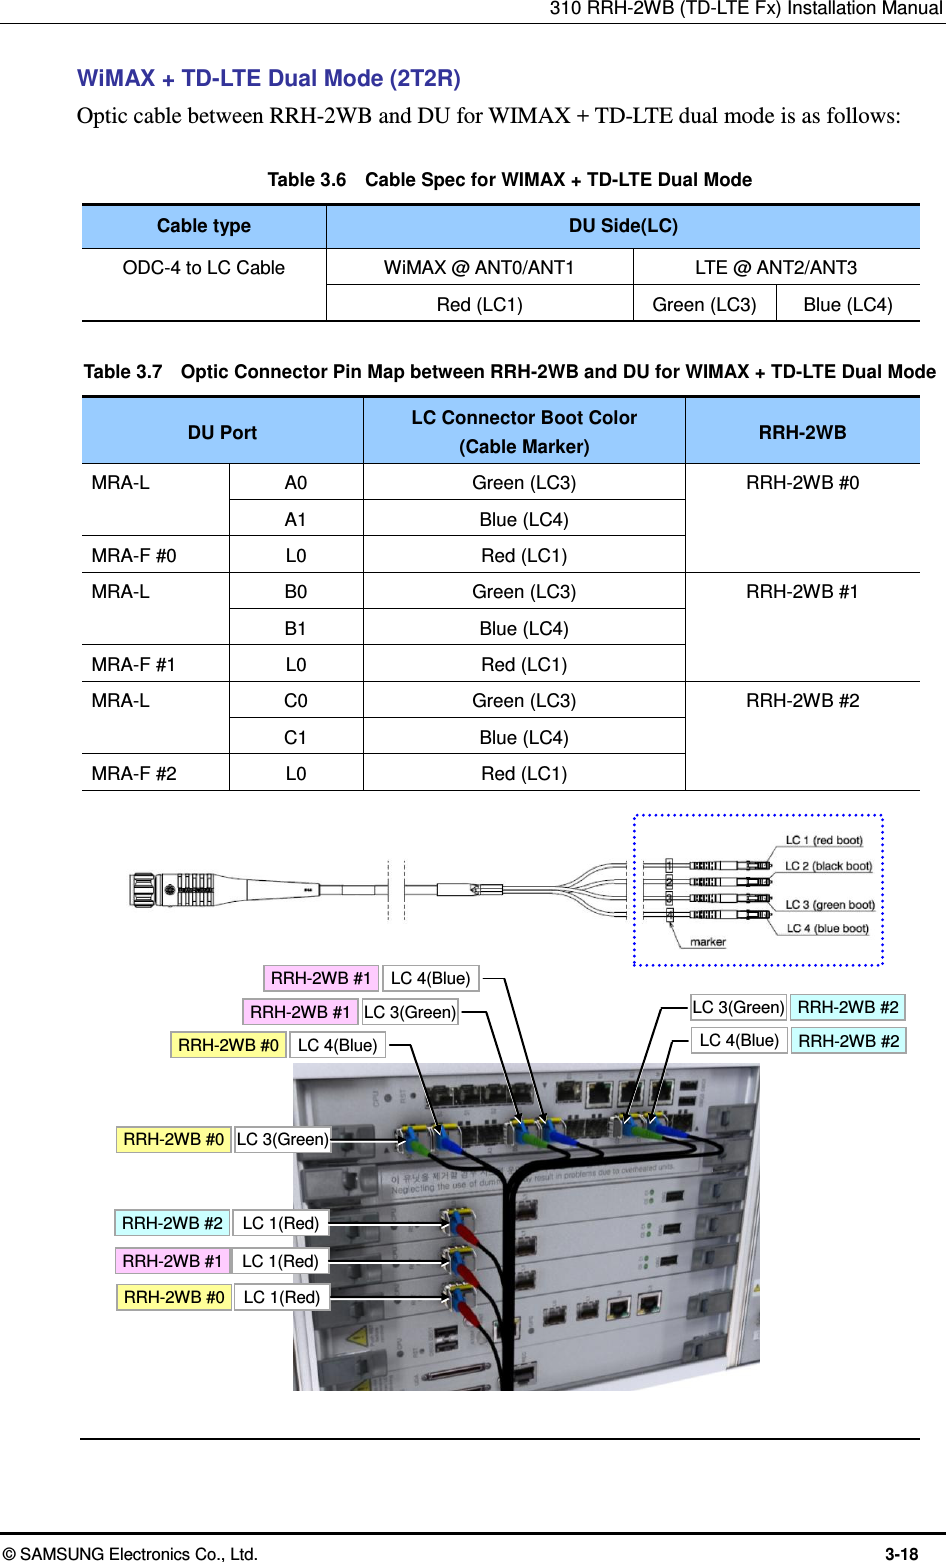 310 RRH-2WB (TD-LTE Fx) Installation Manual  © SAMSUNG Electronics Co., Ltd.  3-18 WiMAX + TD-LTE Dual Mode (2T2R) Optic cable between RRH-2WB and DU for WIMAX + TD-LTE dual mode is as follows:  Table 3.6    Cable Spec for WIMAX + TD-LTE Dual Mode   Cable type DU Side(LC) ODC-4 to LC Cable WiMAX @ ANT0/ANT1 LTE @ ANT2/ANT3 Red (LC1) Green (LC3) Blue (LC4)  Table 3.7    Optic Connector Pin Map between RRH-2WB and DU for WIMAX + TD-LTE Dual Mode DU Port LC Connector Boot Color (Cable Marker) RRH-2WB MRA-L A0 Green (LC3) RRH-2WB #0 A1 Blue (LC4) MRA-F #0 L0 Red (LC1) MRA-L B0 Green (LC3) RRH-2WB #1 B1 Blue (LC4) MRA-F #1 L0 Red (LC1) MRA-L C0 Green (LC3) RRH-2WB #2 C1 Blue (LC4) MRA-F #2 L0 Red (LC1)                       RRH-2WB #0 RRH-2WB #1 RRH-2WB #2 LC 1(Red) LC 1(Red) LC 1(Red) LC 3(Green) RRH-2WB #0 LC 4(Blue) RRH-2WB #0 LC 3(Green) RRH-2WB #1 LC 4(Blue) RRH-2WB #1 LC 3(Green) RRH-2WB #2 LC 4(Blue) RRH-2WB #2 